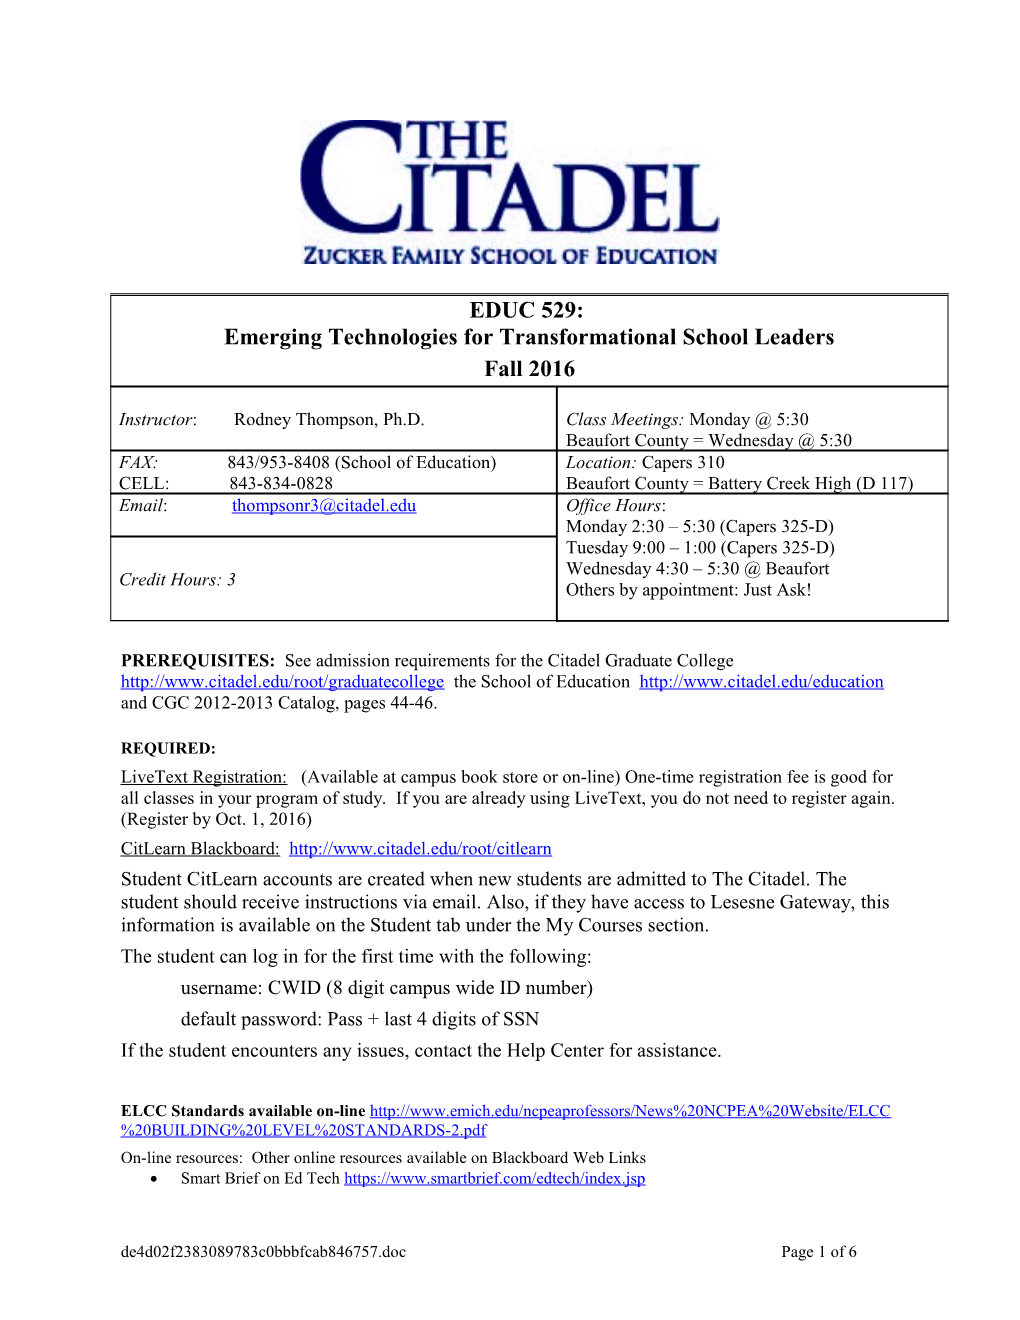 PREREQUISITES: See Admission Requirements for the Citadel Graduate College the School Of